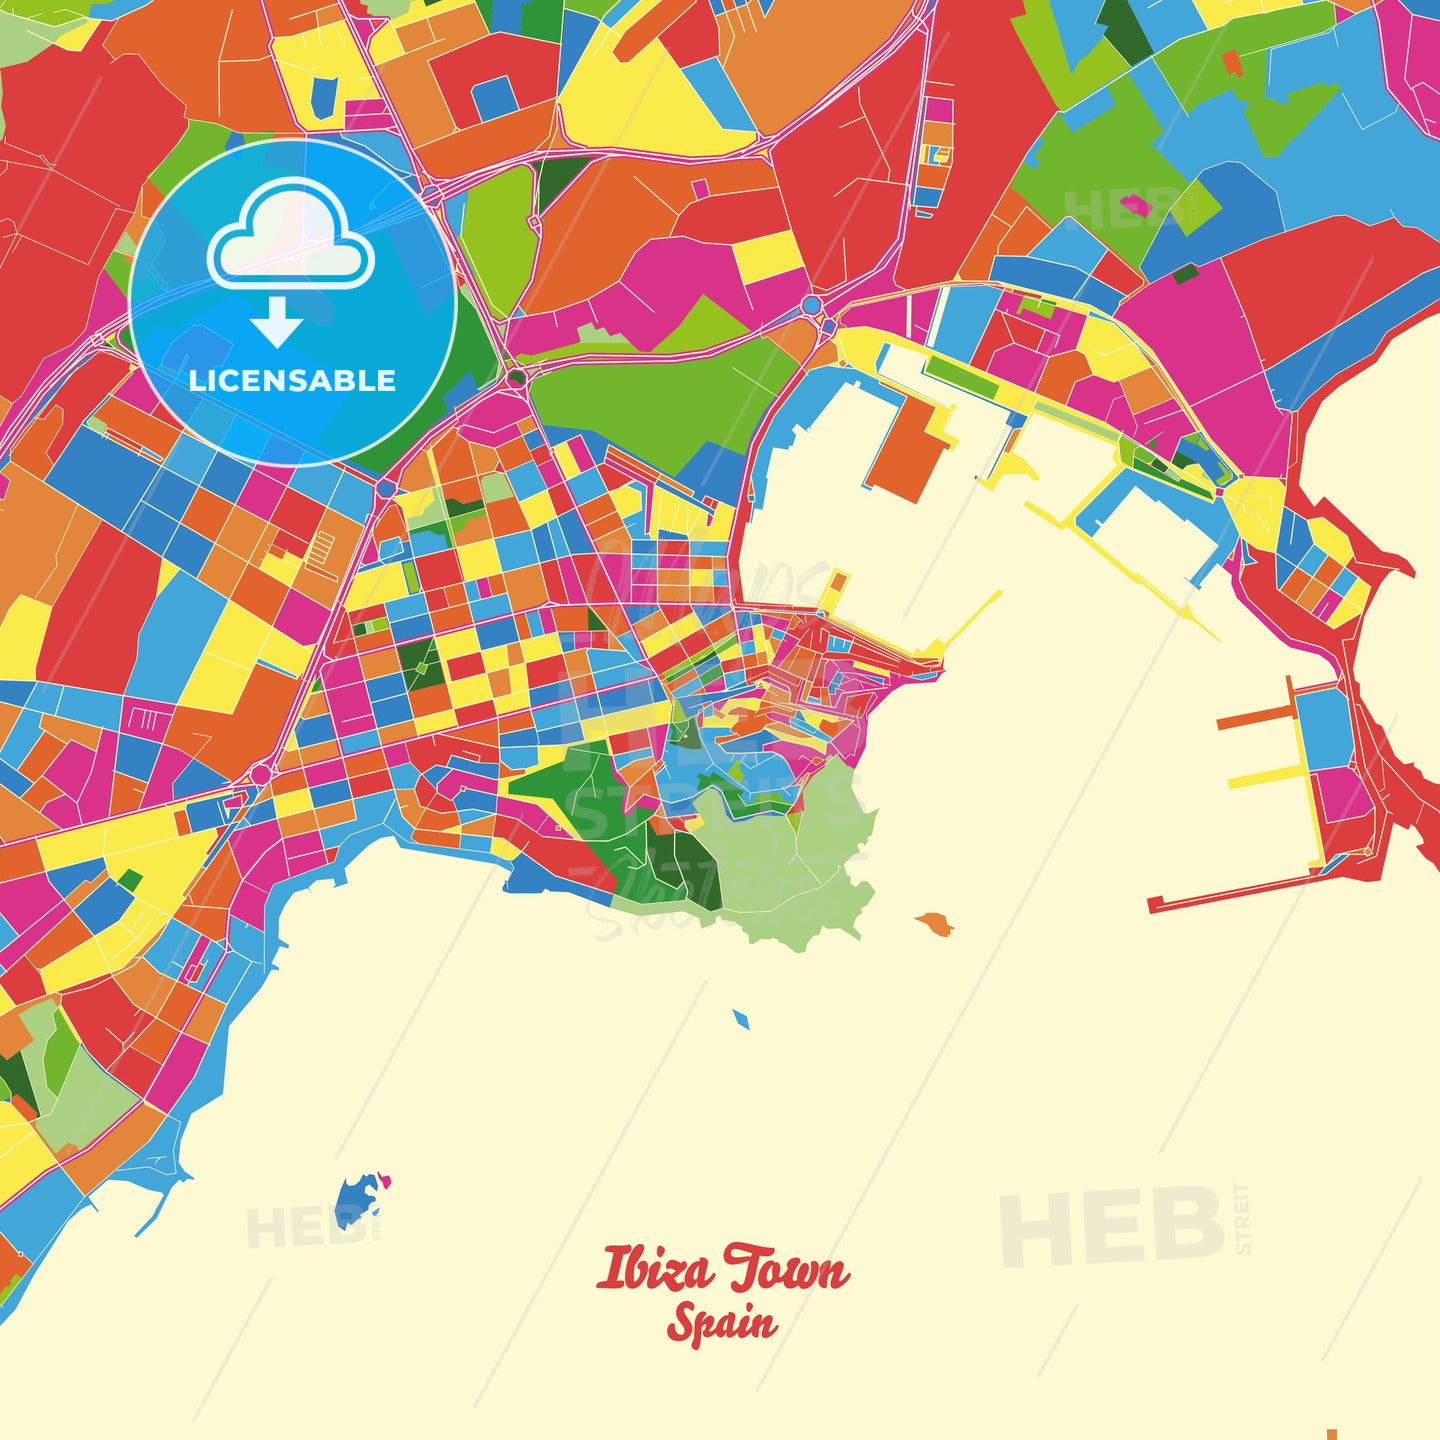 Ibiza Town, Spain Crazy Colorful Street Map Poster Template - HEBSTREITS Sketches